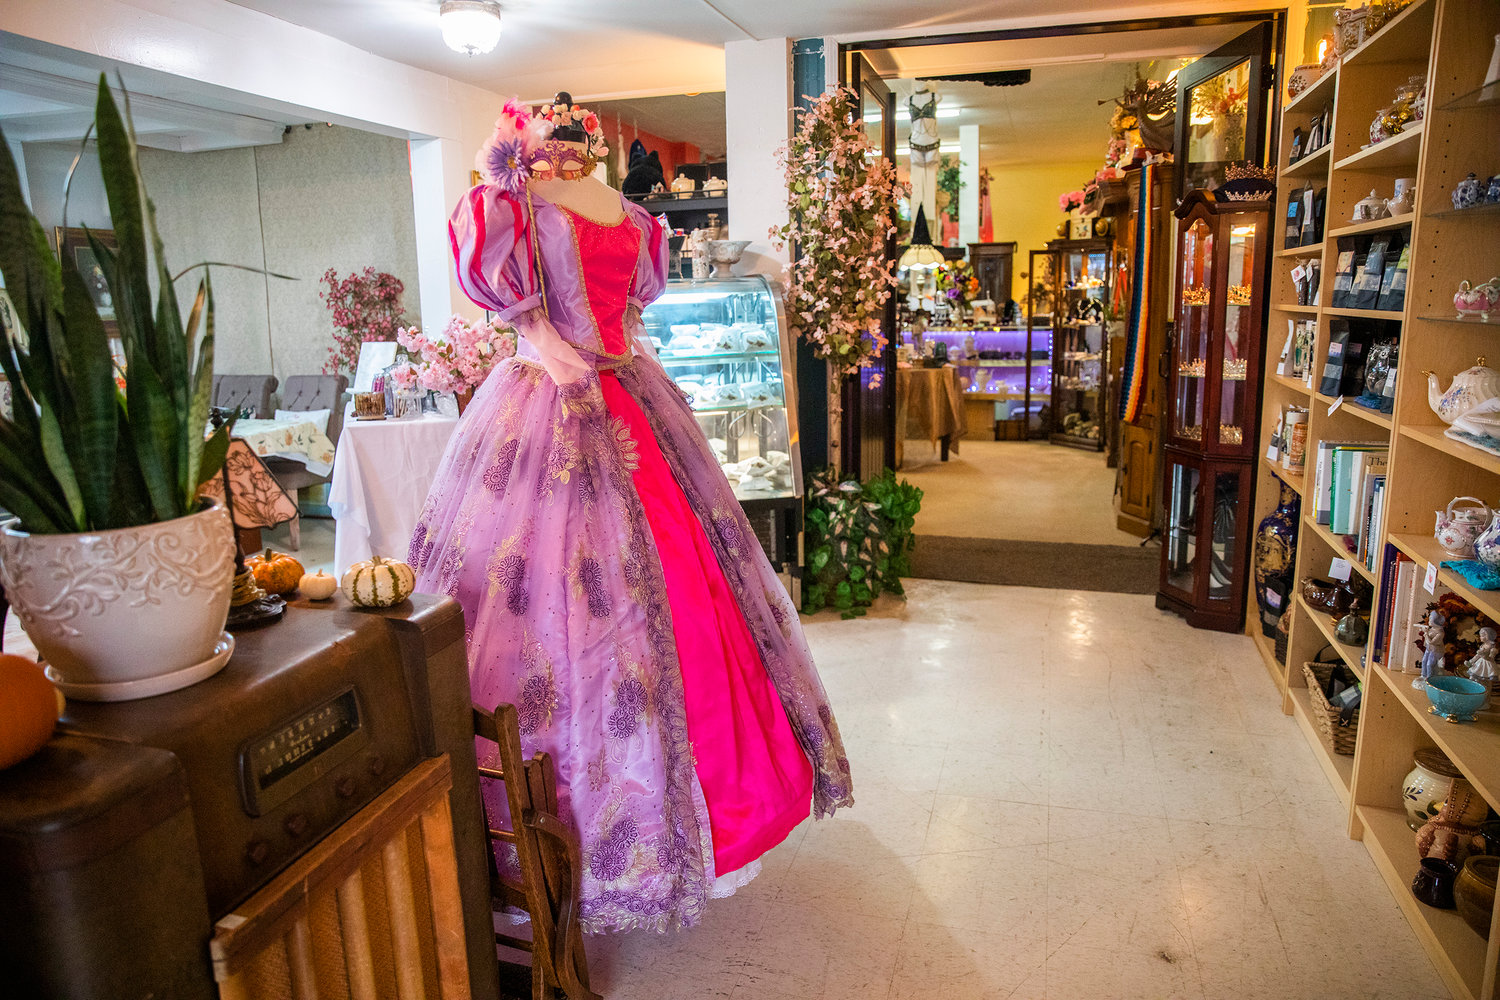 Dresses and antiques sit on display at The Victorian Showcase and Steampunk Emporium in downtown Centralia on Friday.